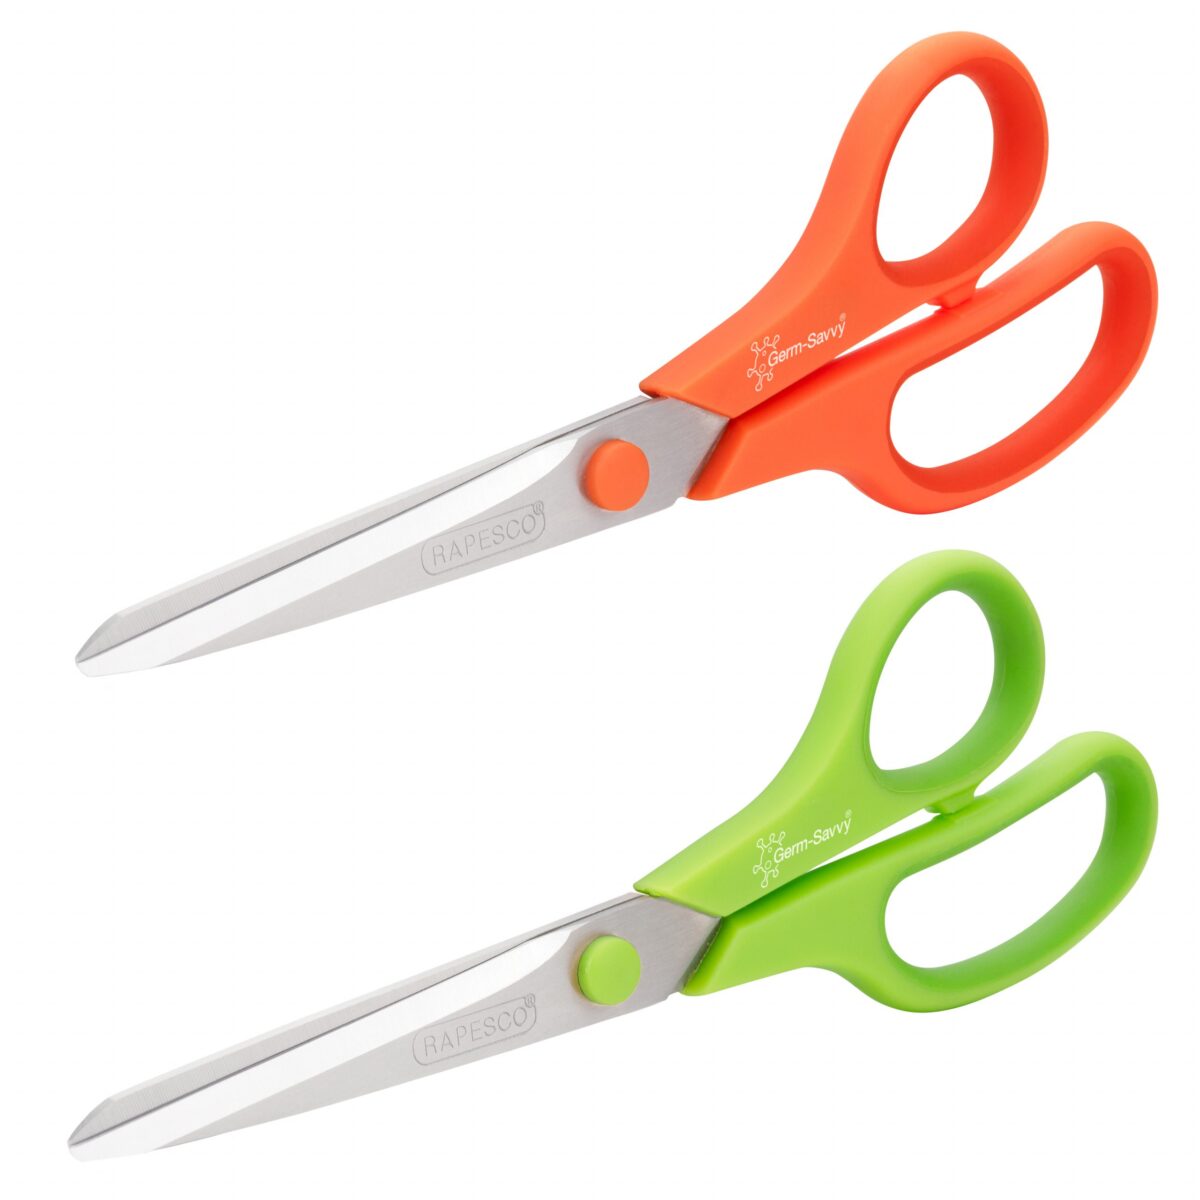 Norpro Multi Blade Herb Scissors with Blade Cleaner, 8-inch, Green